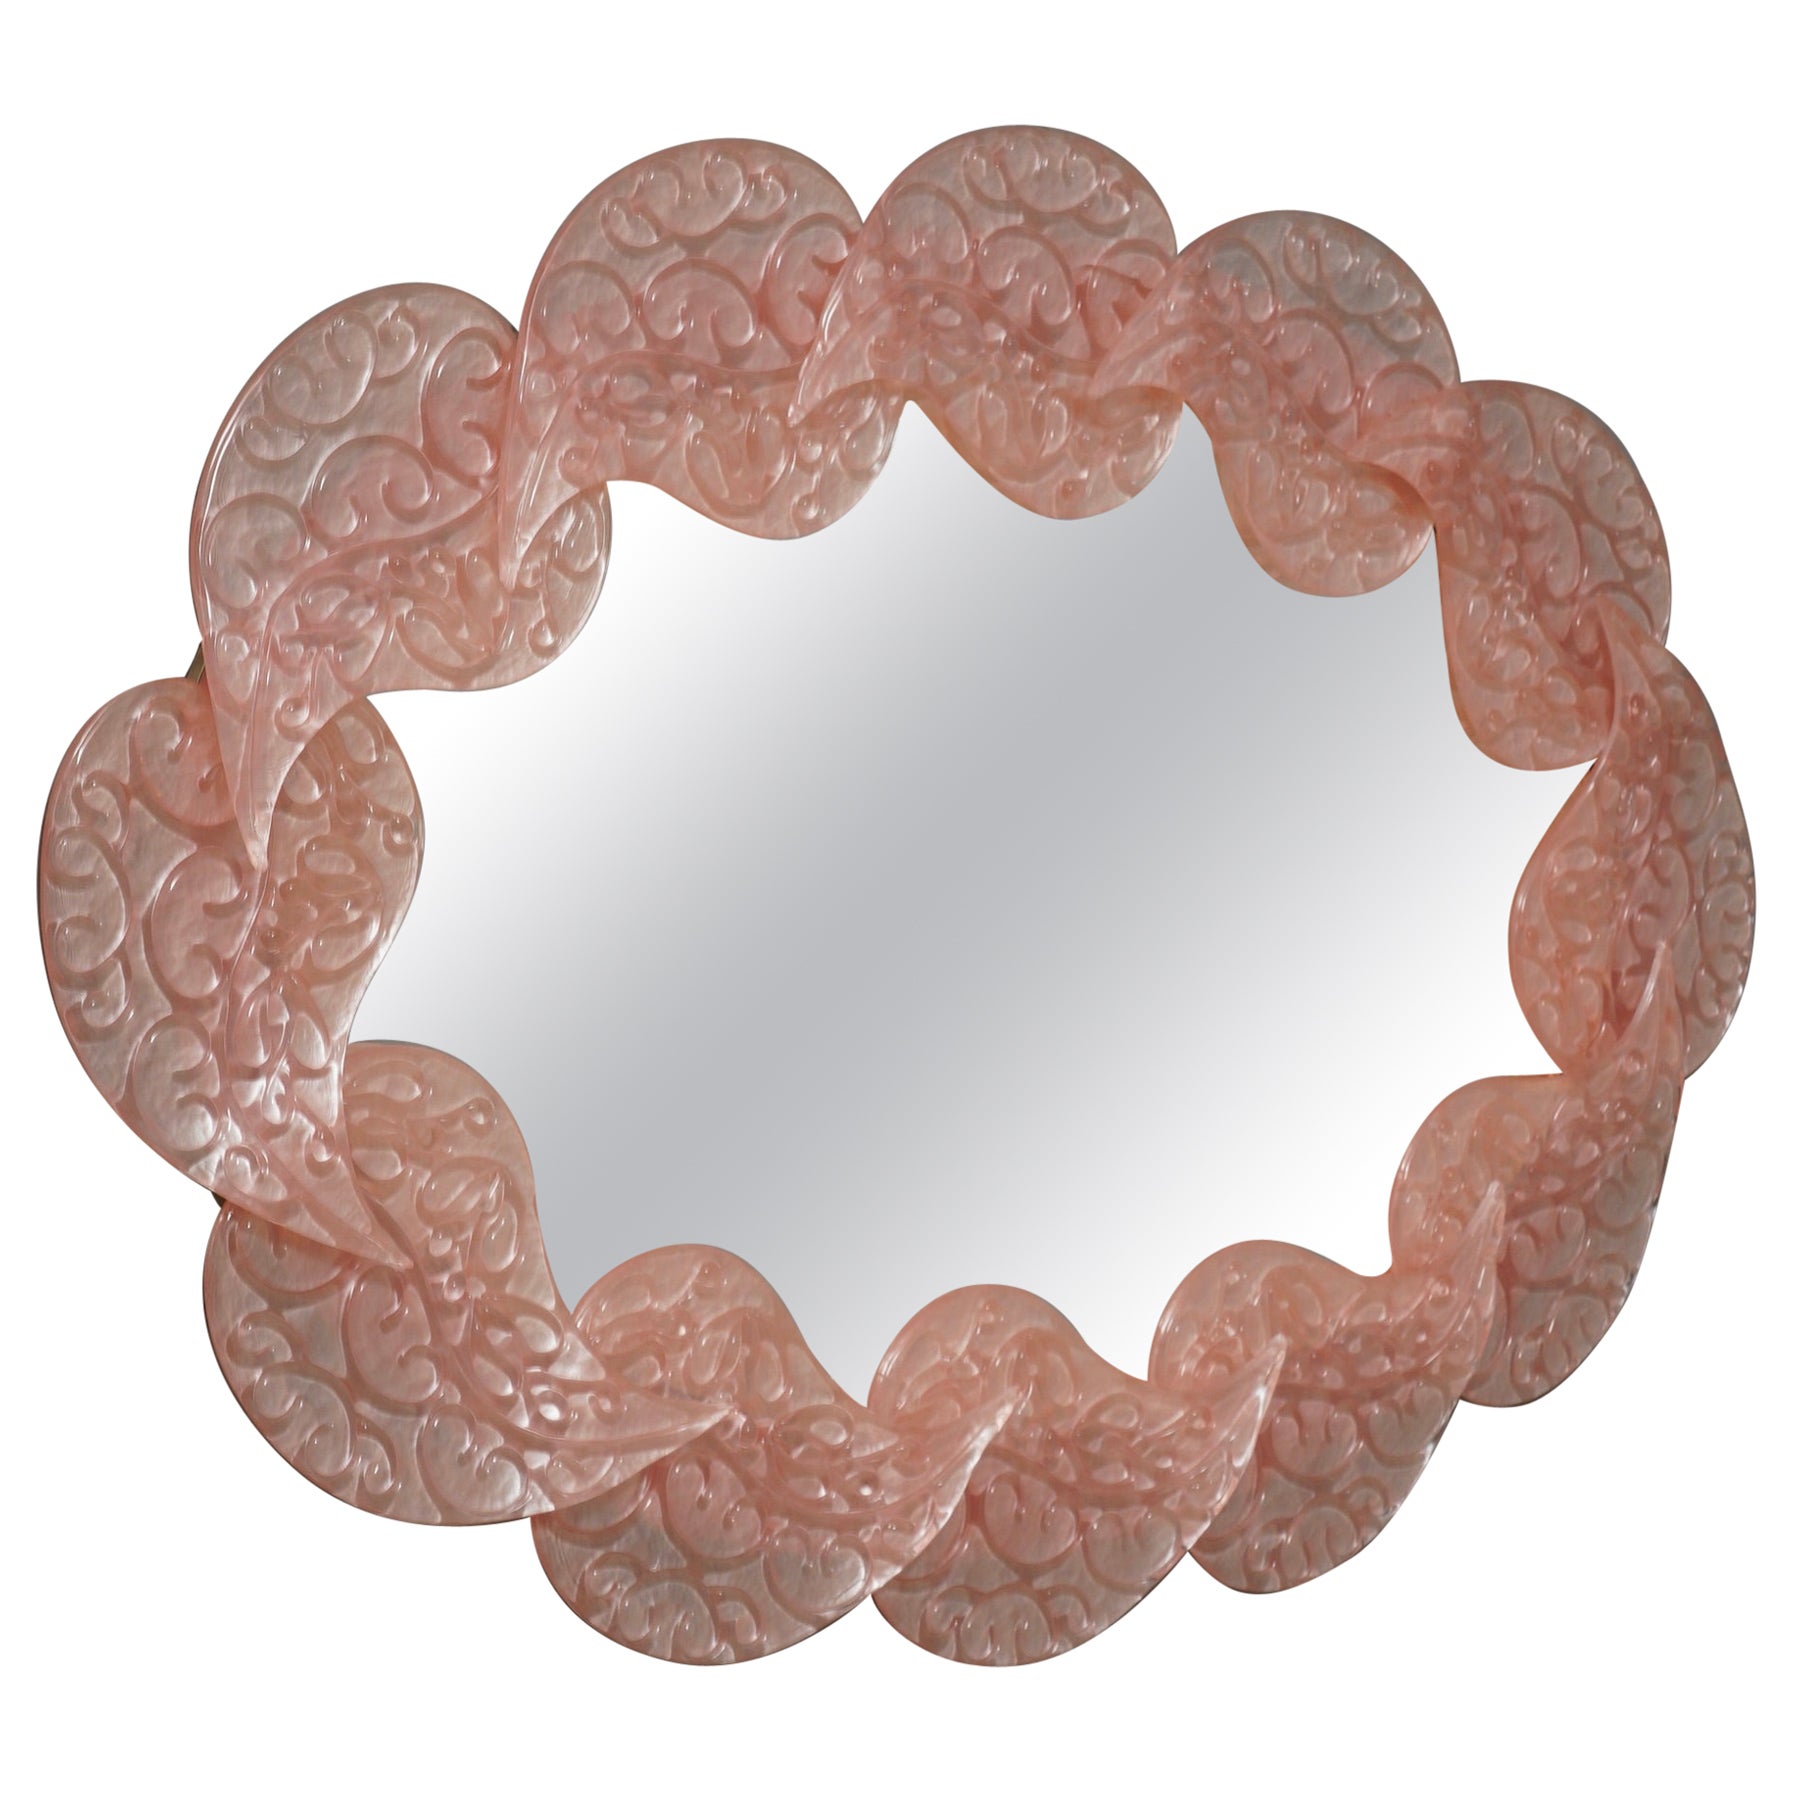 Midcentury Murano Oval Pink Art Glass and Brass Italian Wall Mirror, 2000 For Sale